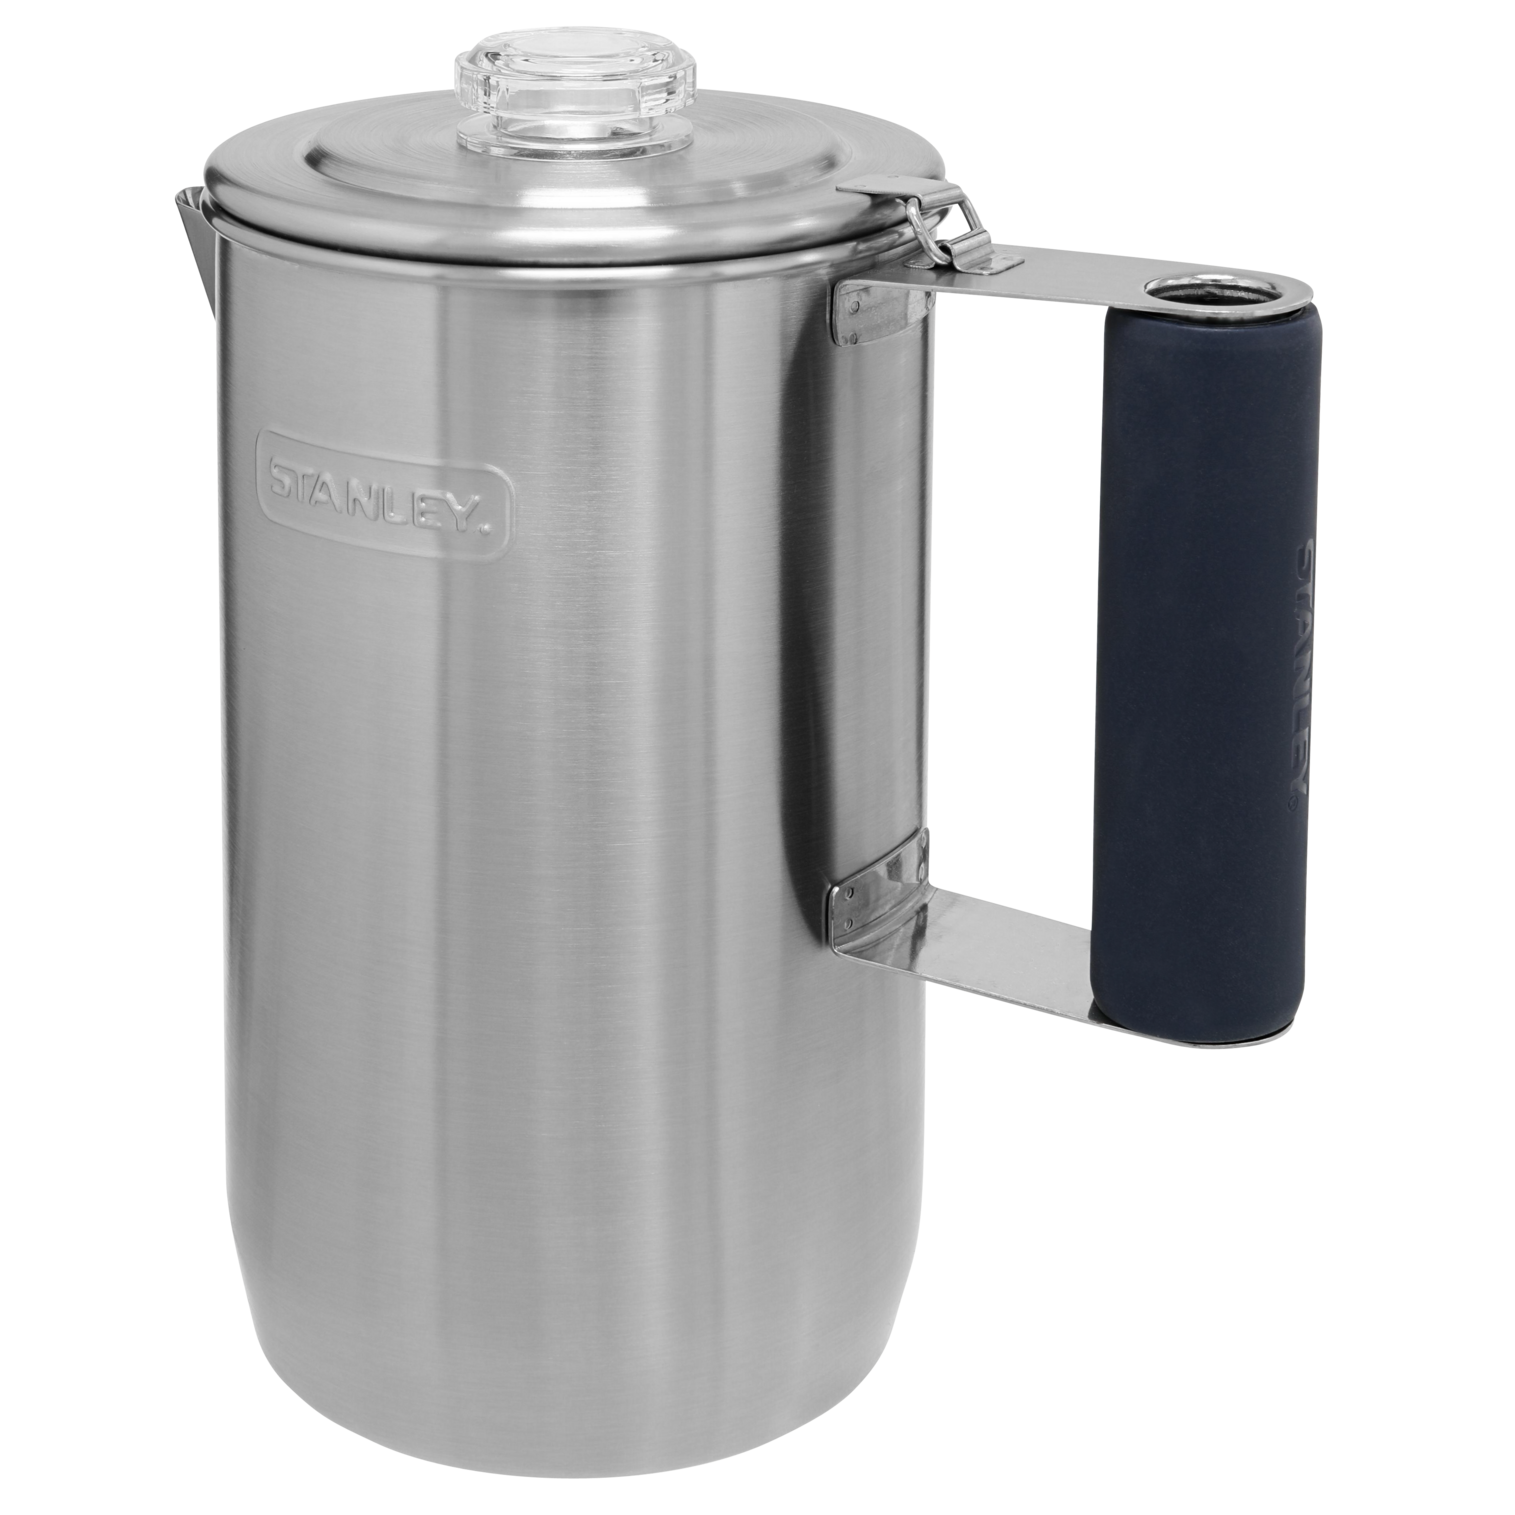 Adventure Cool Grip Camp Percolator | 1.1 QT: Stainless